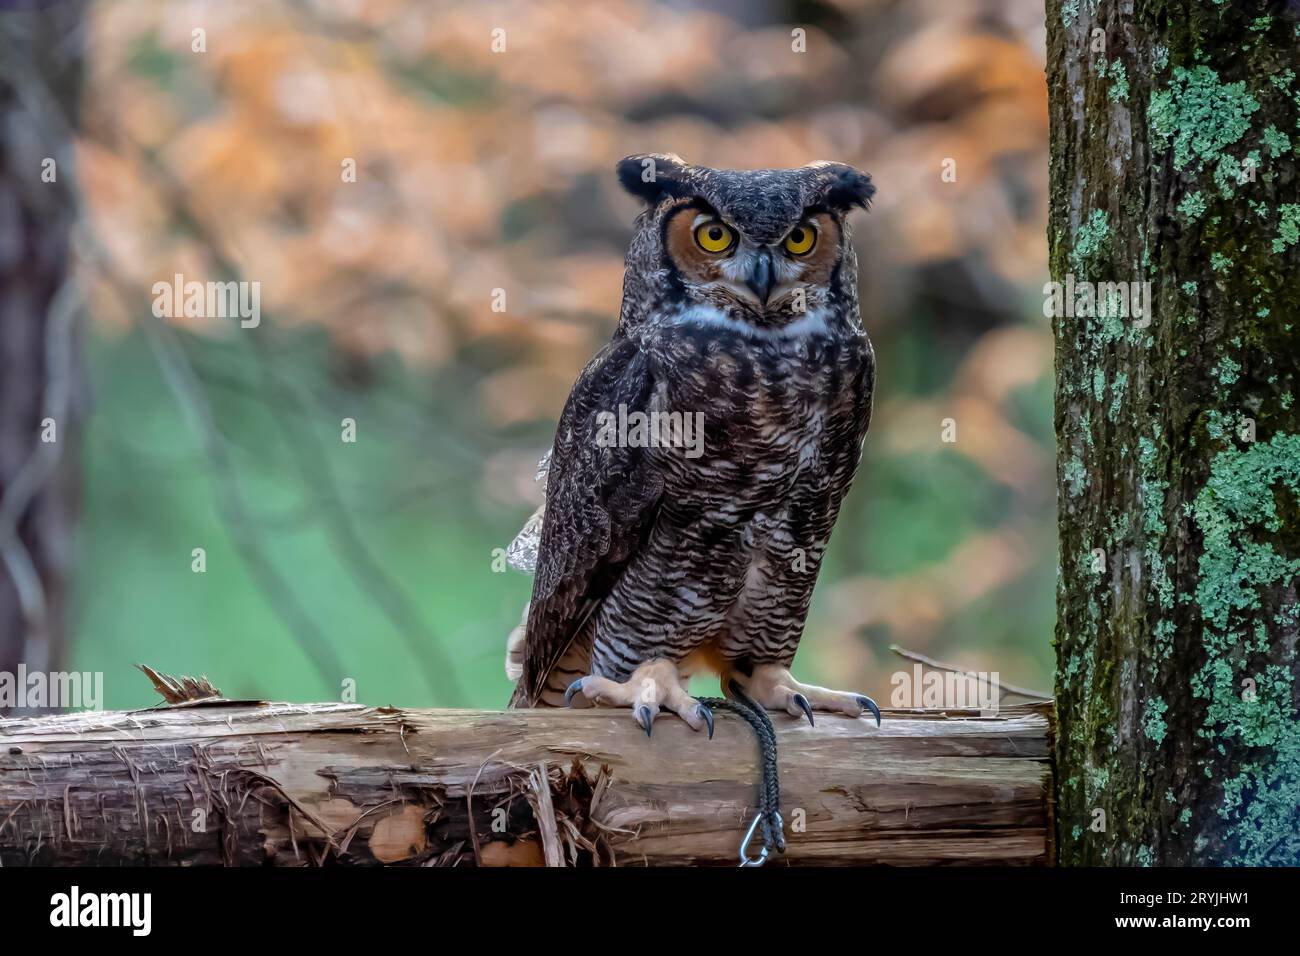 Great Horned Owl Sits Outdoors In Its Natural Environment Stock Photo